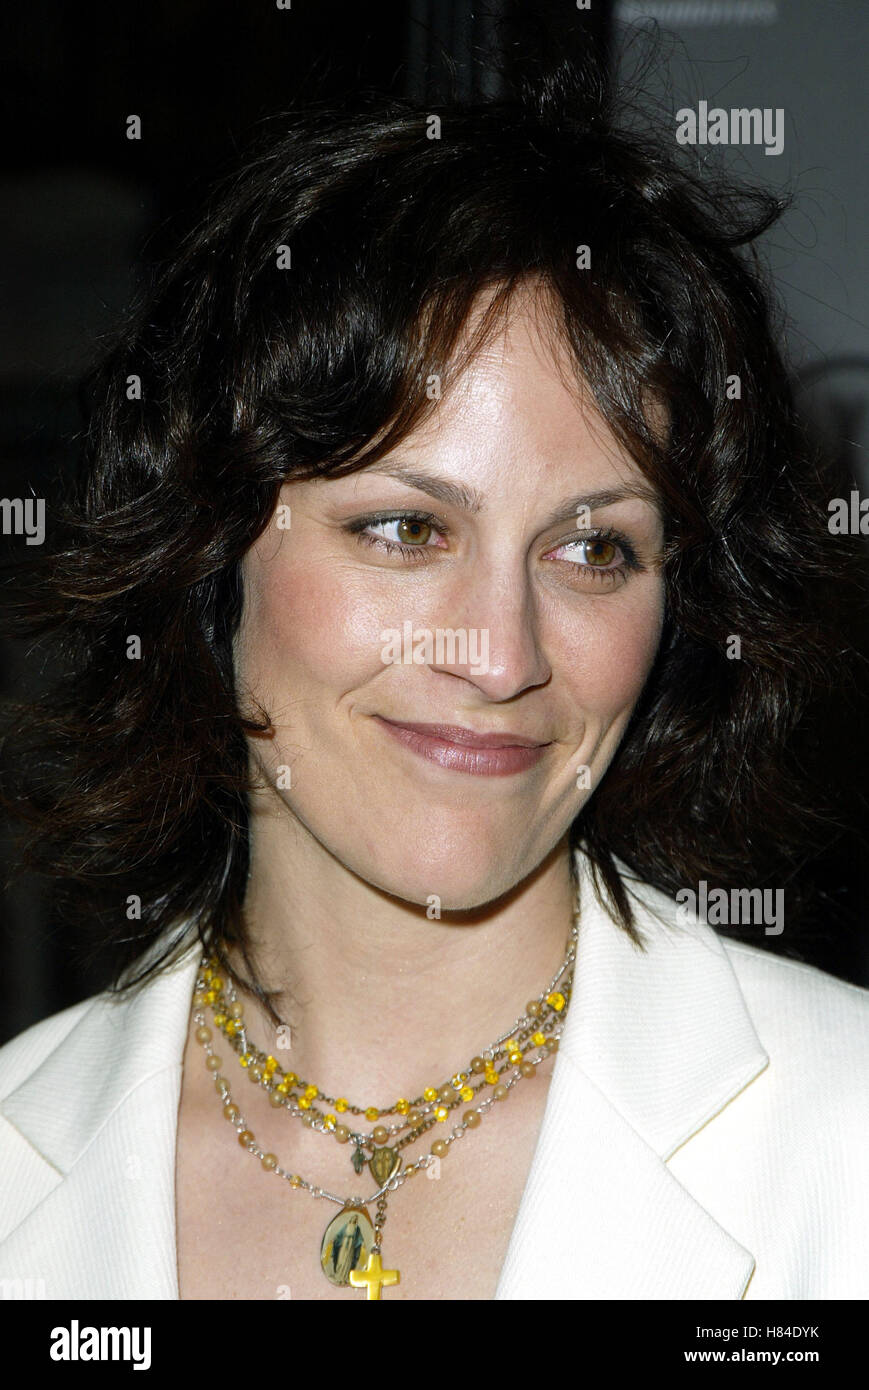 Pictures of annabeth gish